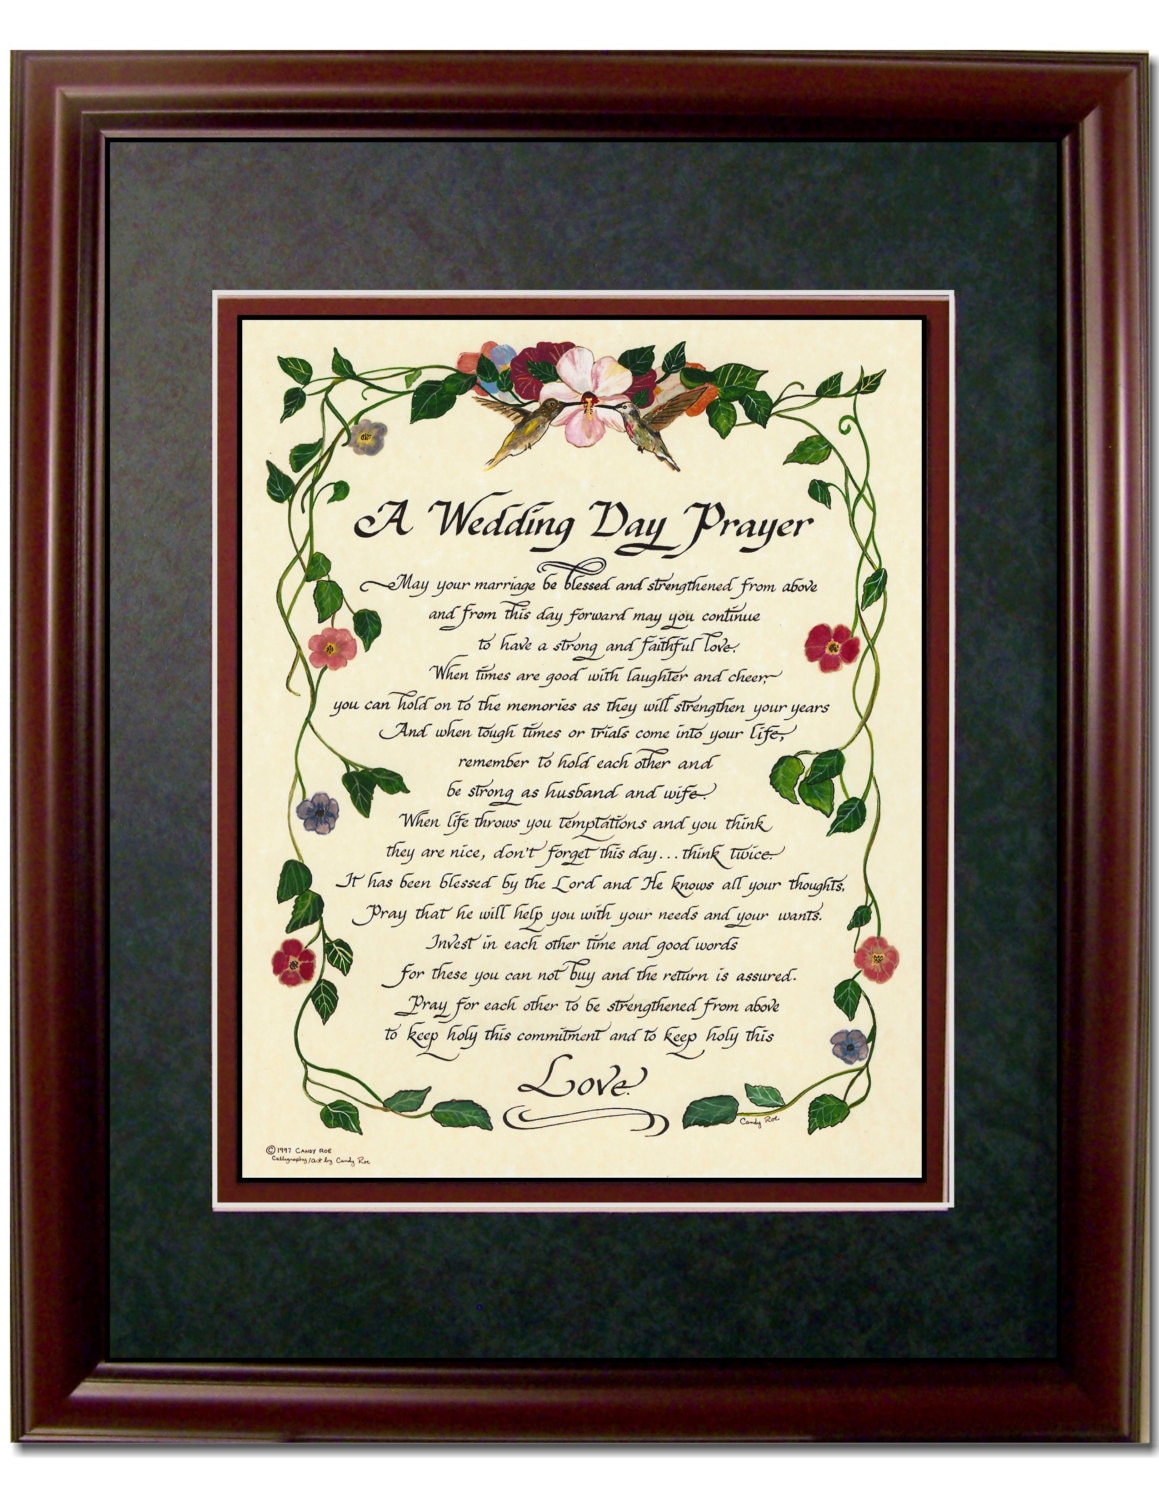 Wedding Day Prayer Framed Christian Calligraphy Poem With Free Heart